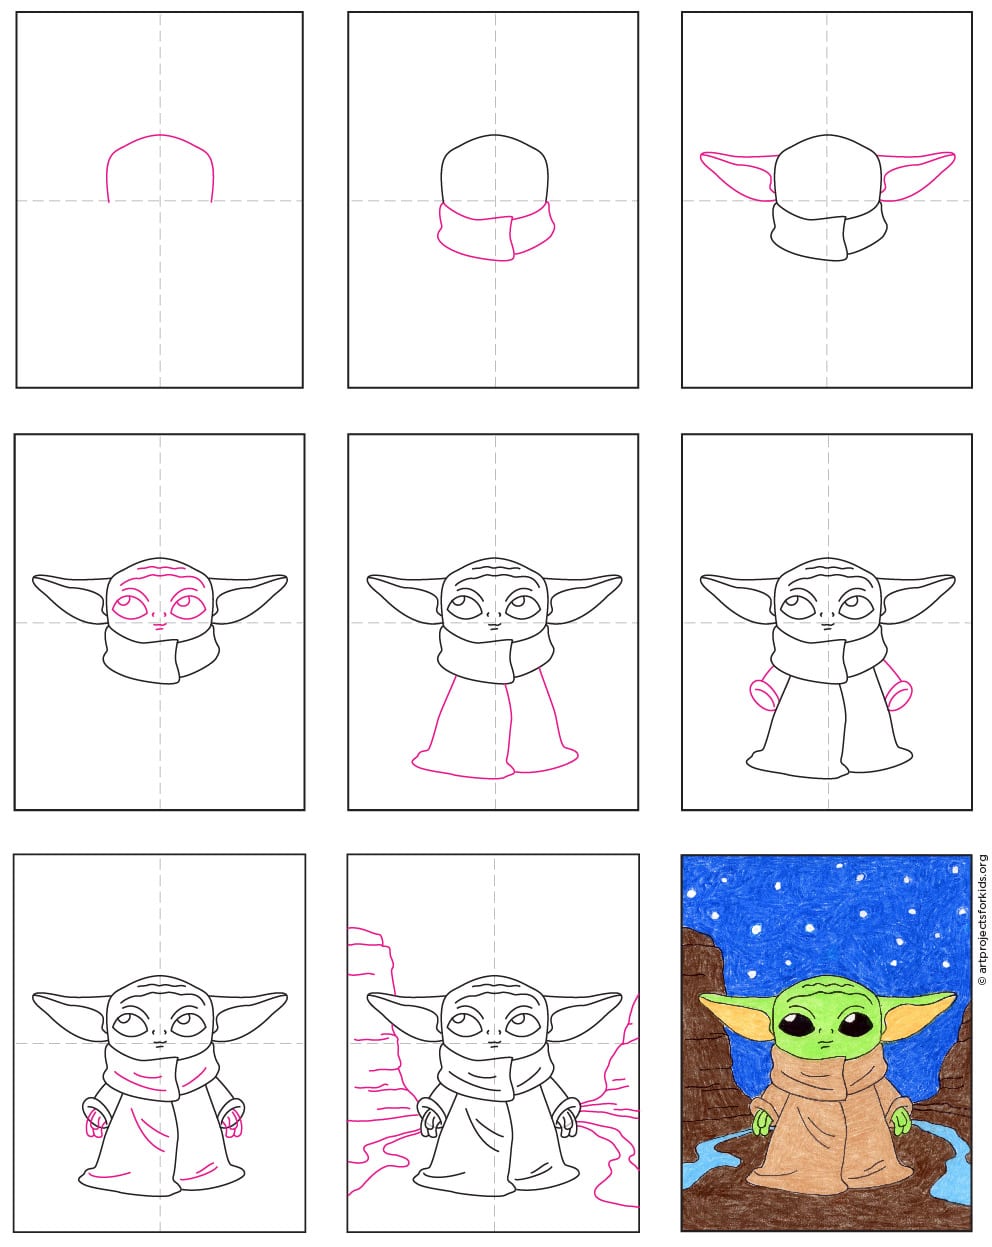 Draw Baby Yoda in Space · Art Projects for Kids